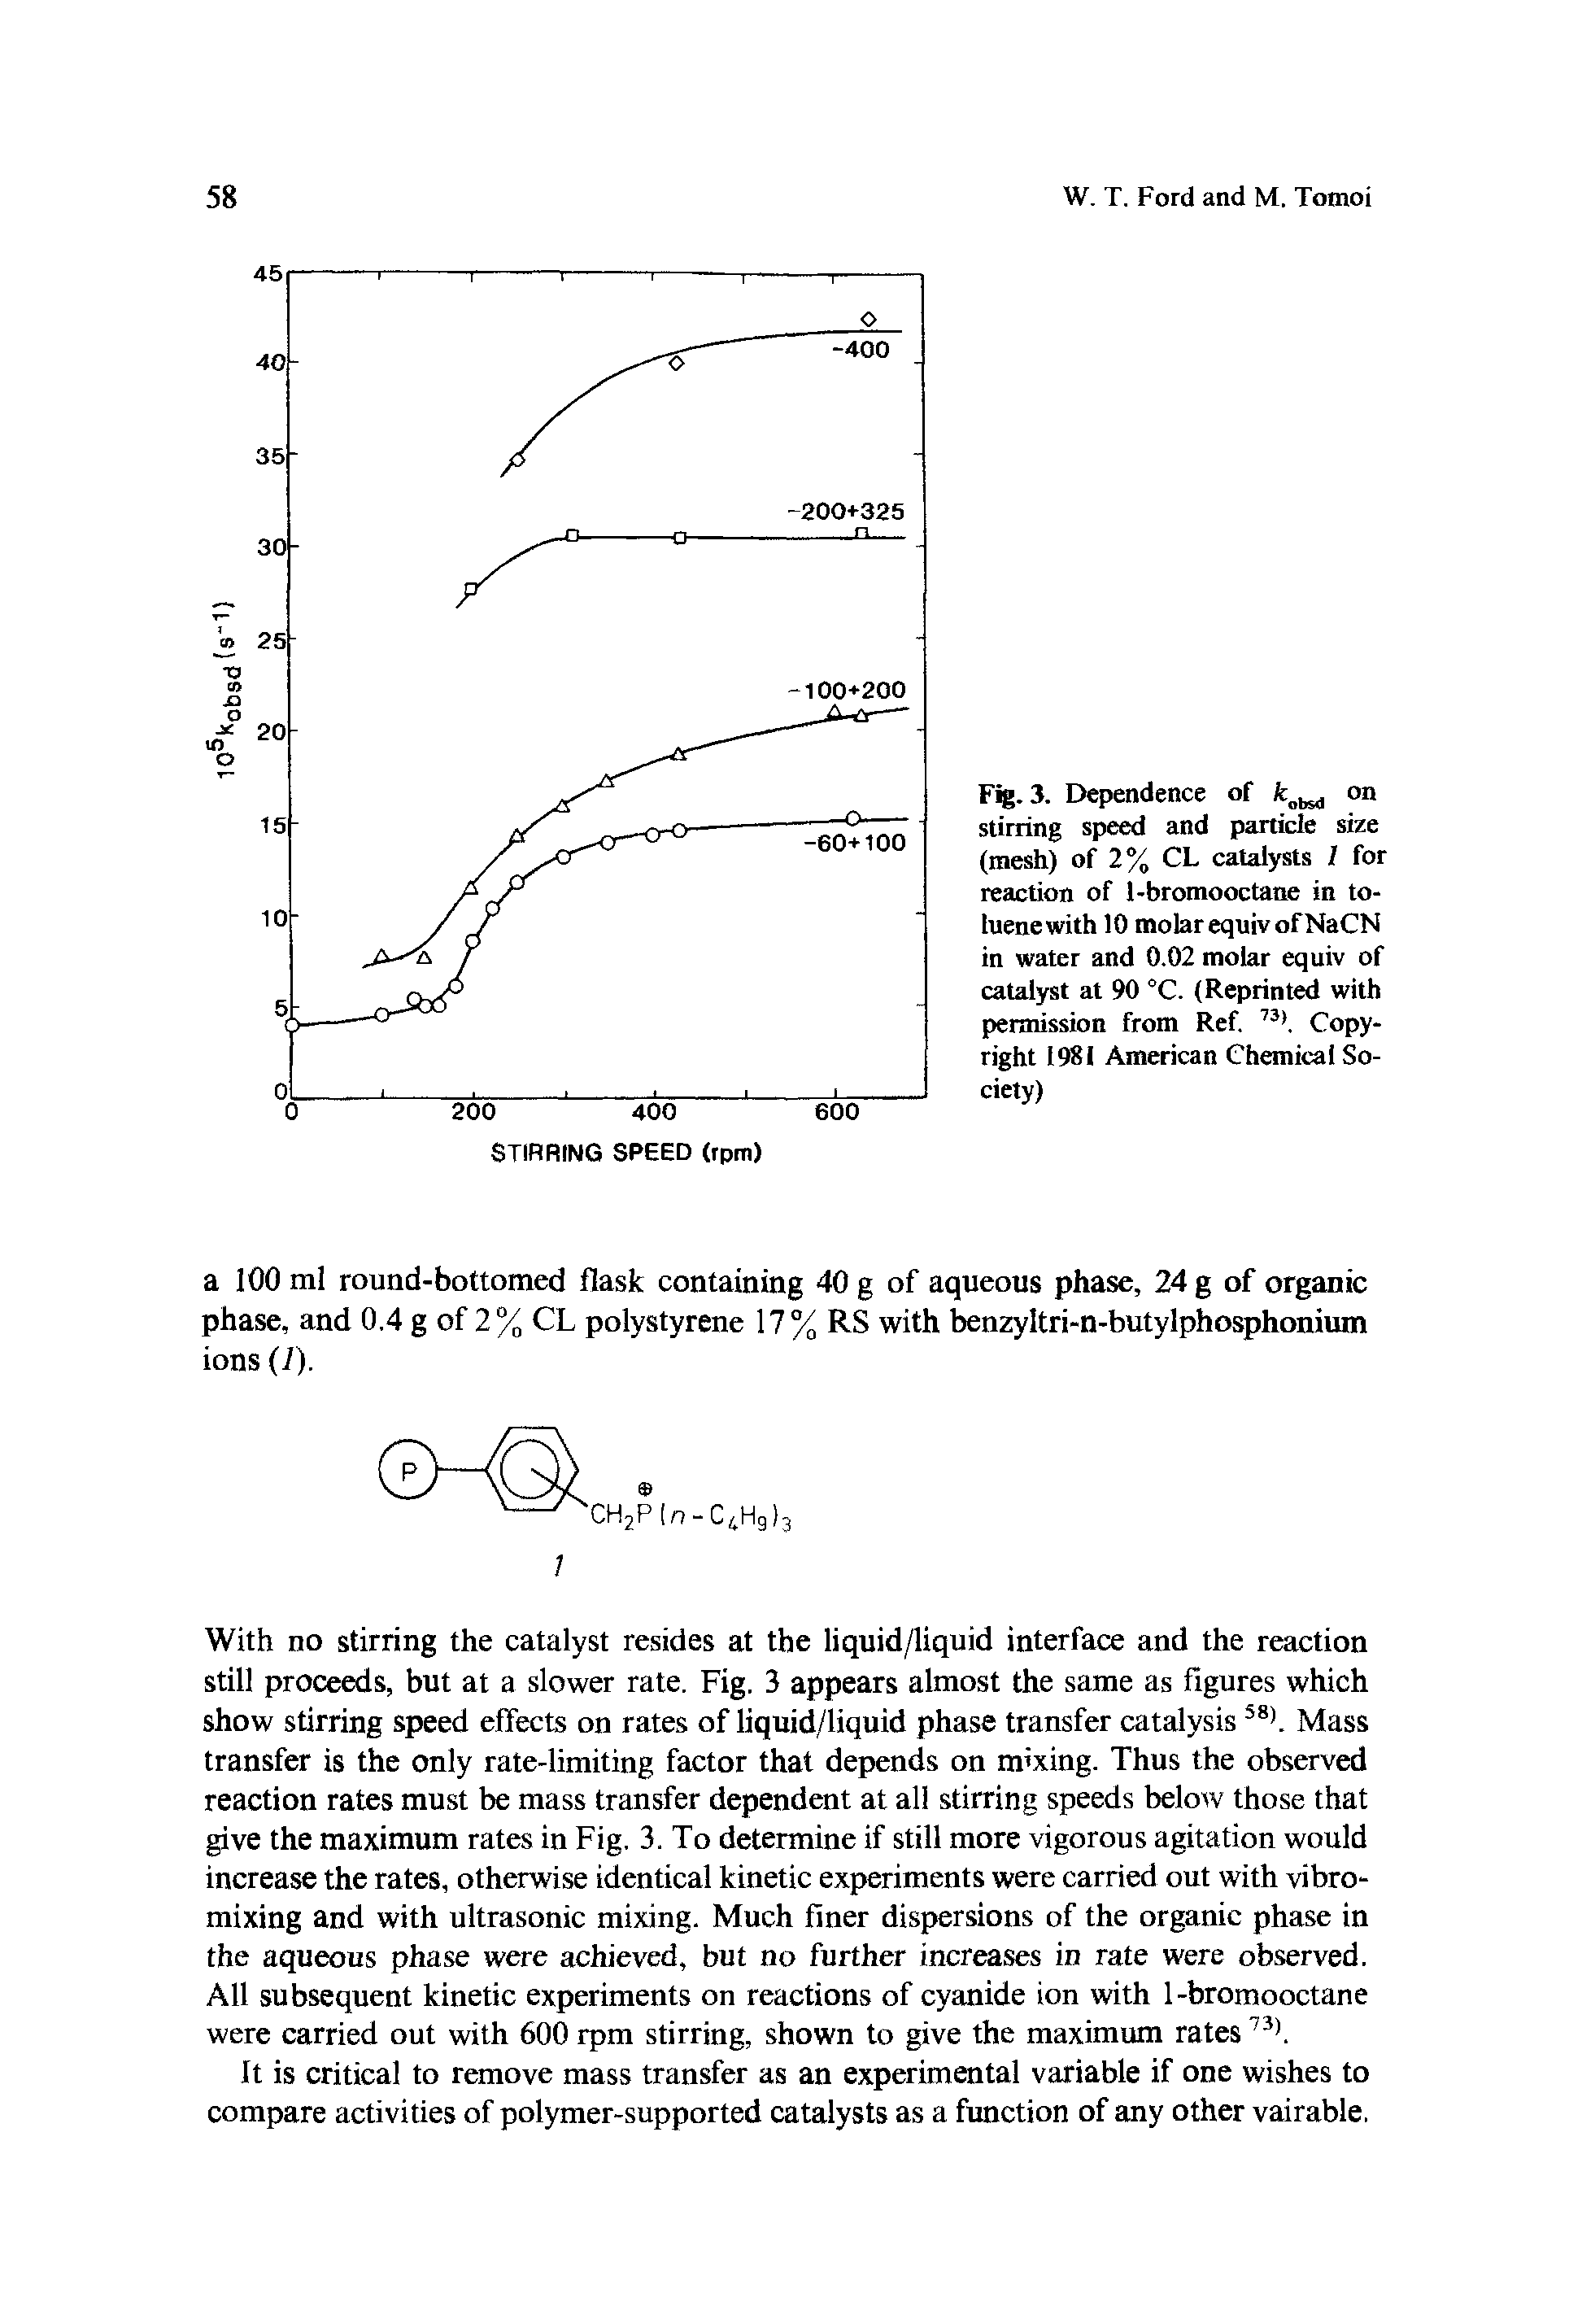 Fig. 3. Dependence of fcobsd on stirring speed and particle size (mesh) of 2% CL catalysts I for reaction of 1-bromooctane in to-hienewith 10 molar equiv of NaCN in water and 0.02 molar equiv of catalyst at 90 °C. (Reprinted with permission from Ref. 73). Copyright 1981 American Chemical Society)...